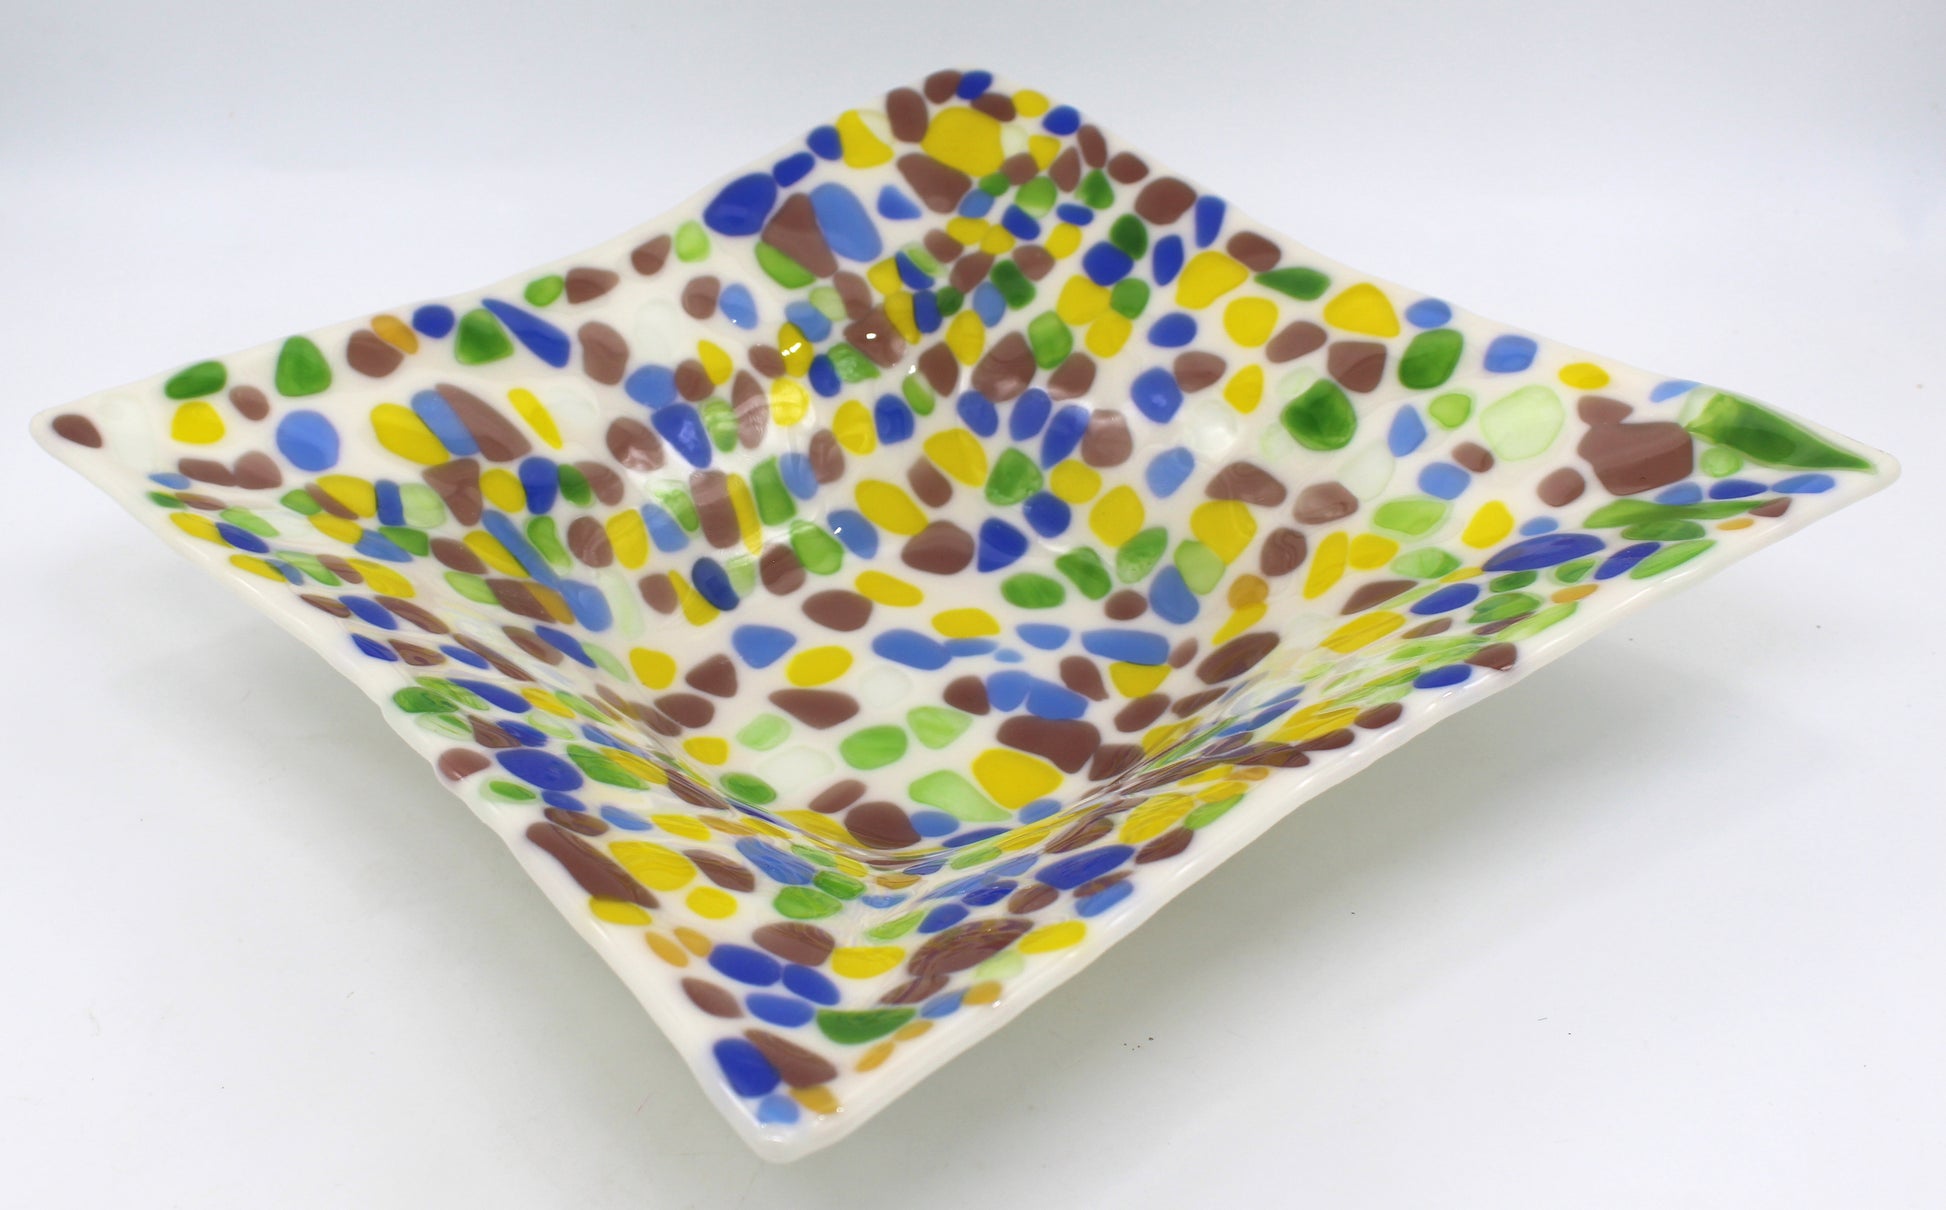 off white glass square bowl with specs of yellow, purple, green, and blue